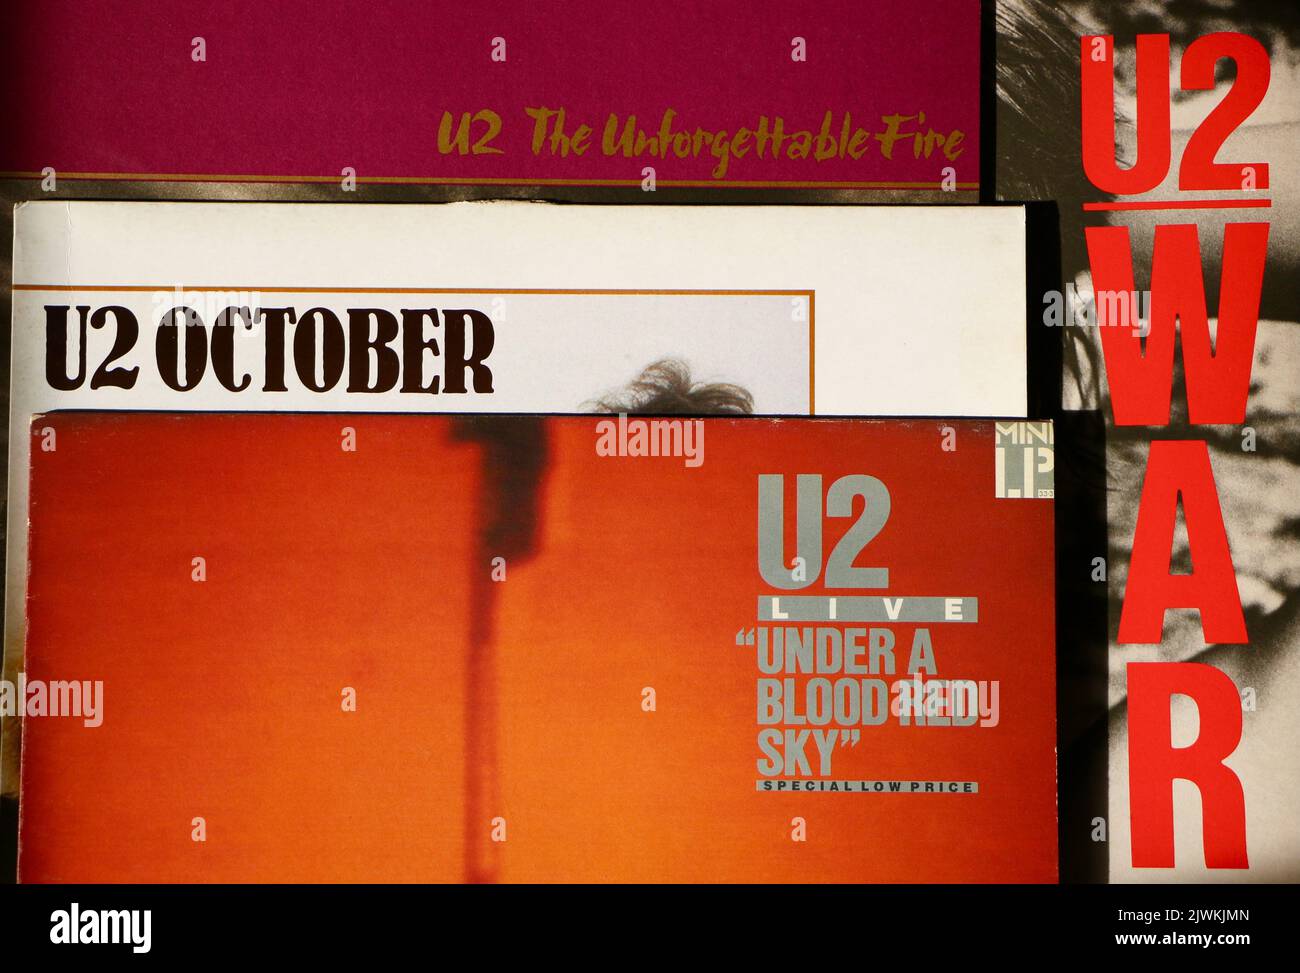 Photo of album covers of original pressings of vinyl discs by U2 The Unforgettable Fire October U2 Live Under a Blood Red Sky and War Stock Photo